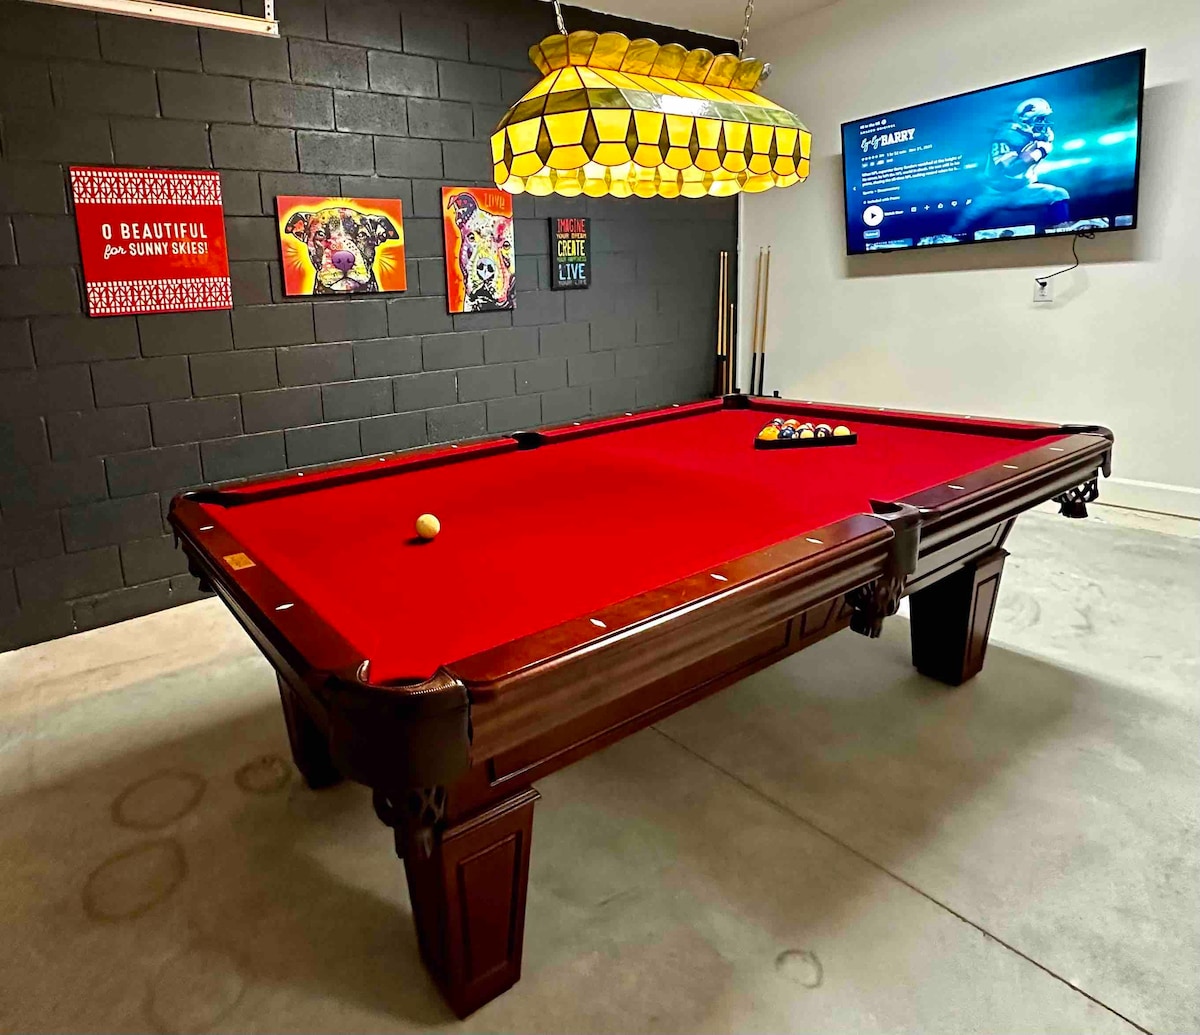 The Billiard: close to downtown with fenced yard